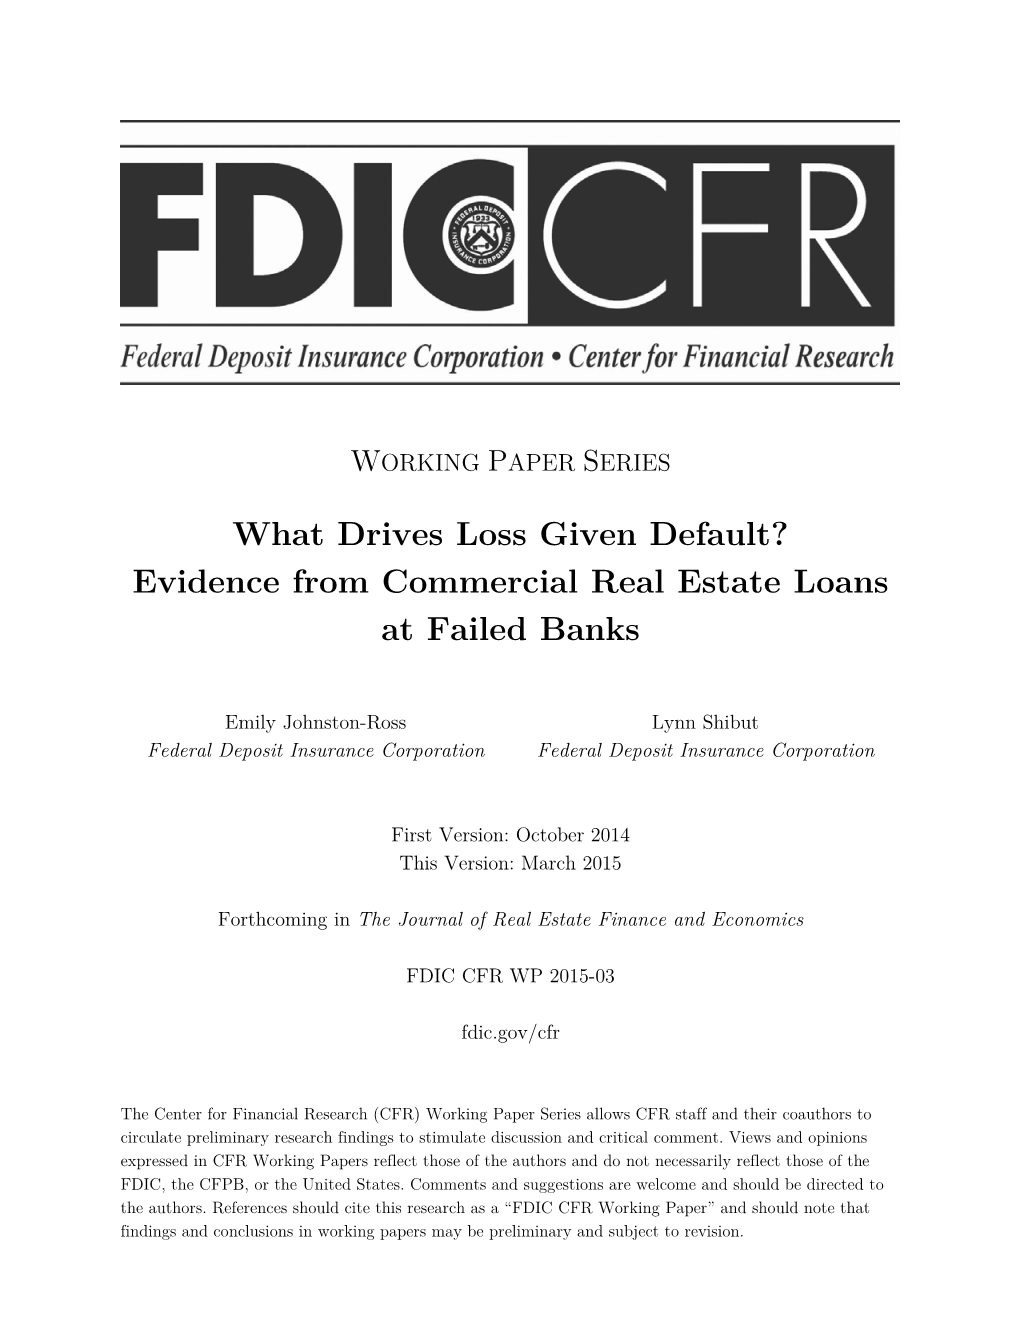 Evidence from Commercial Real Estate Loans at Failed Banks